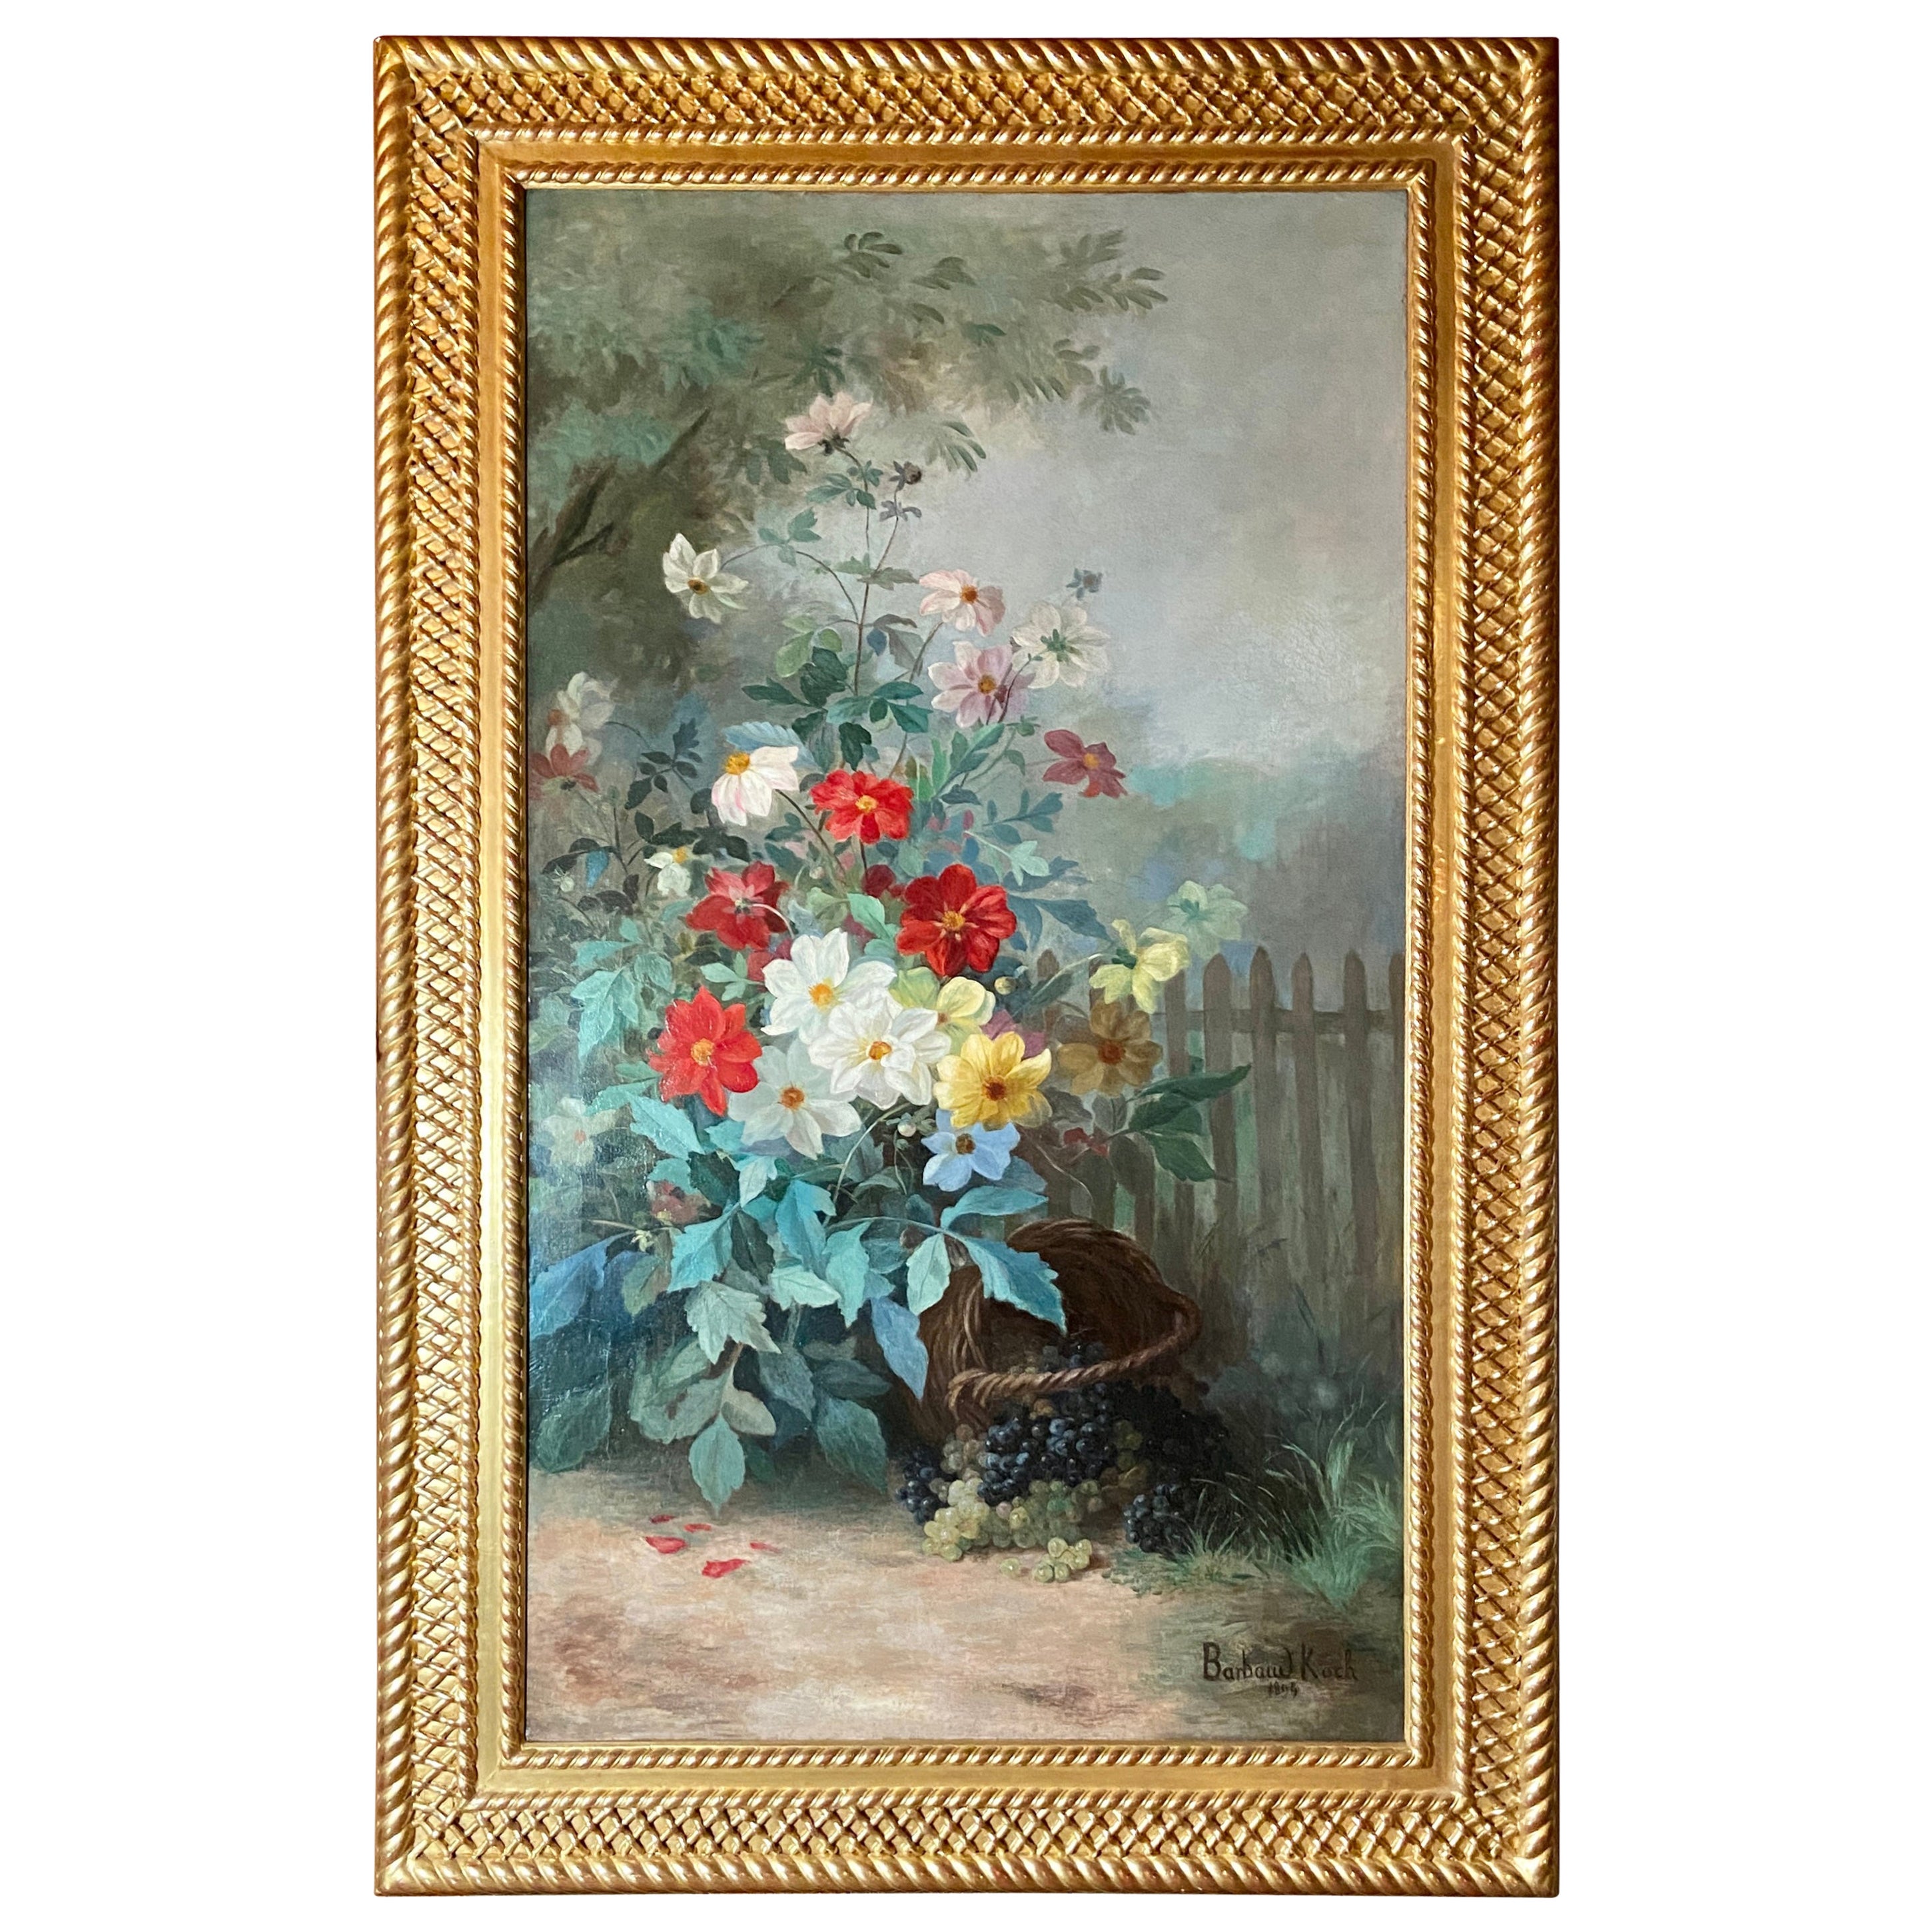 Antique French Oil on Canvas Floral Painting Signed "Barbaud Koch, 1899."